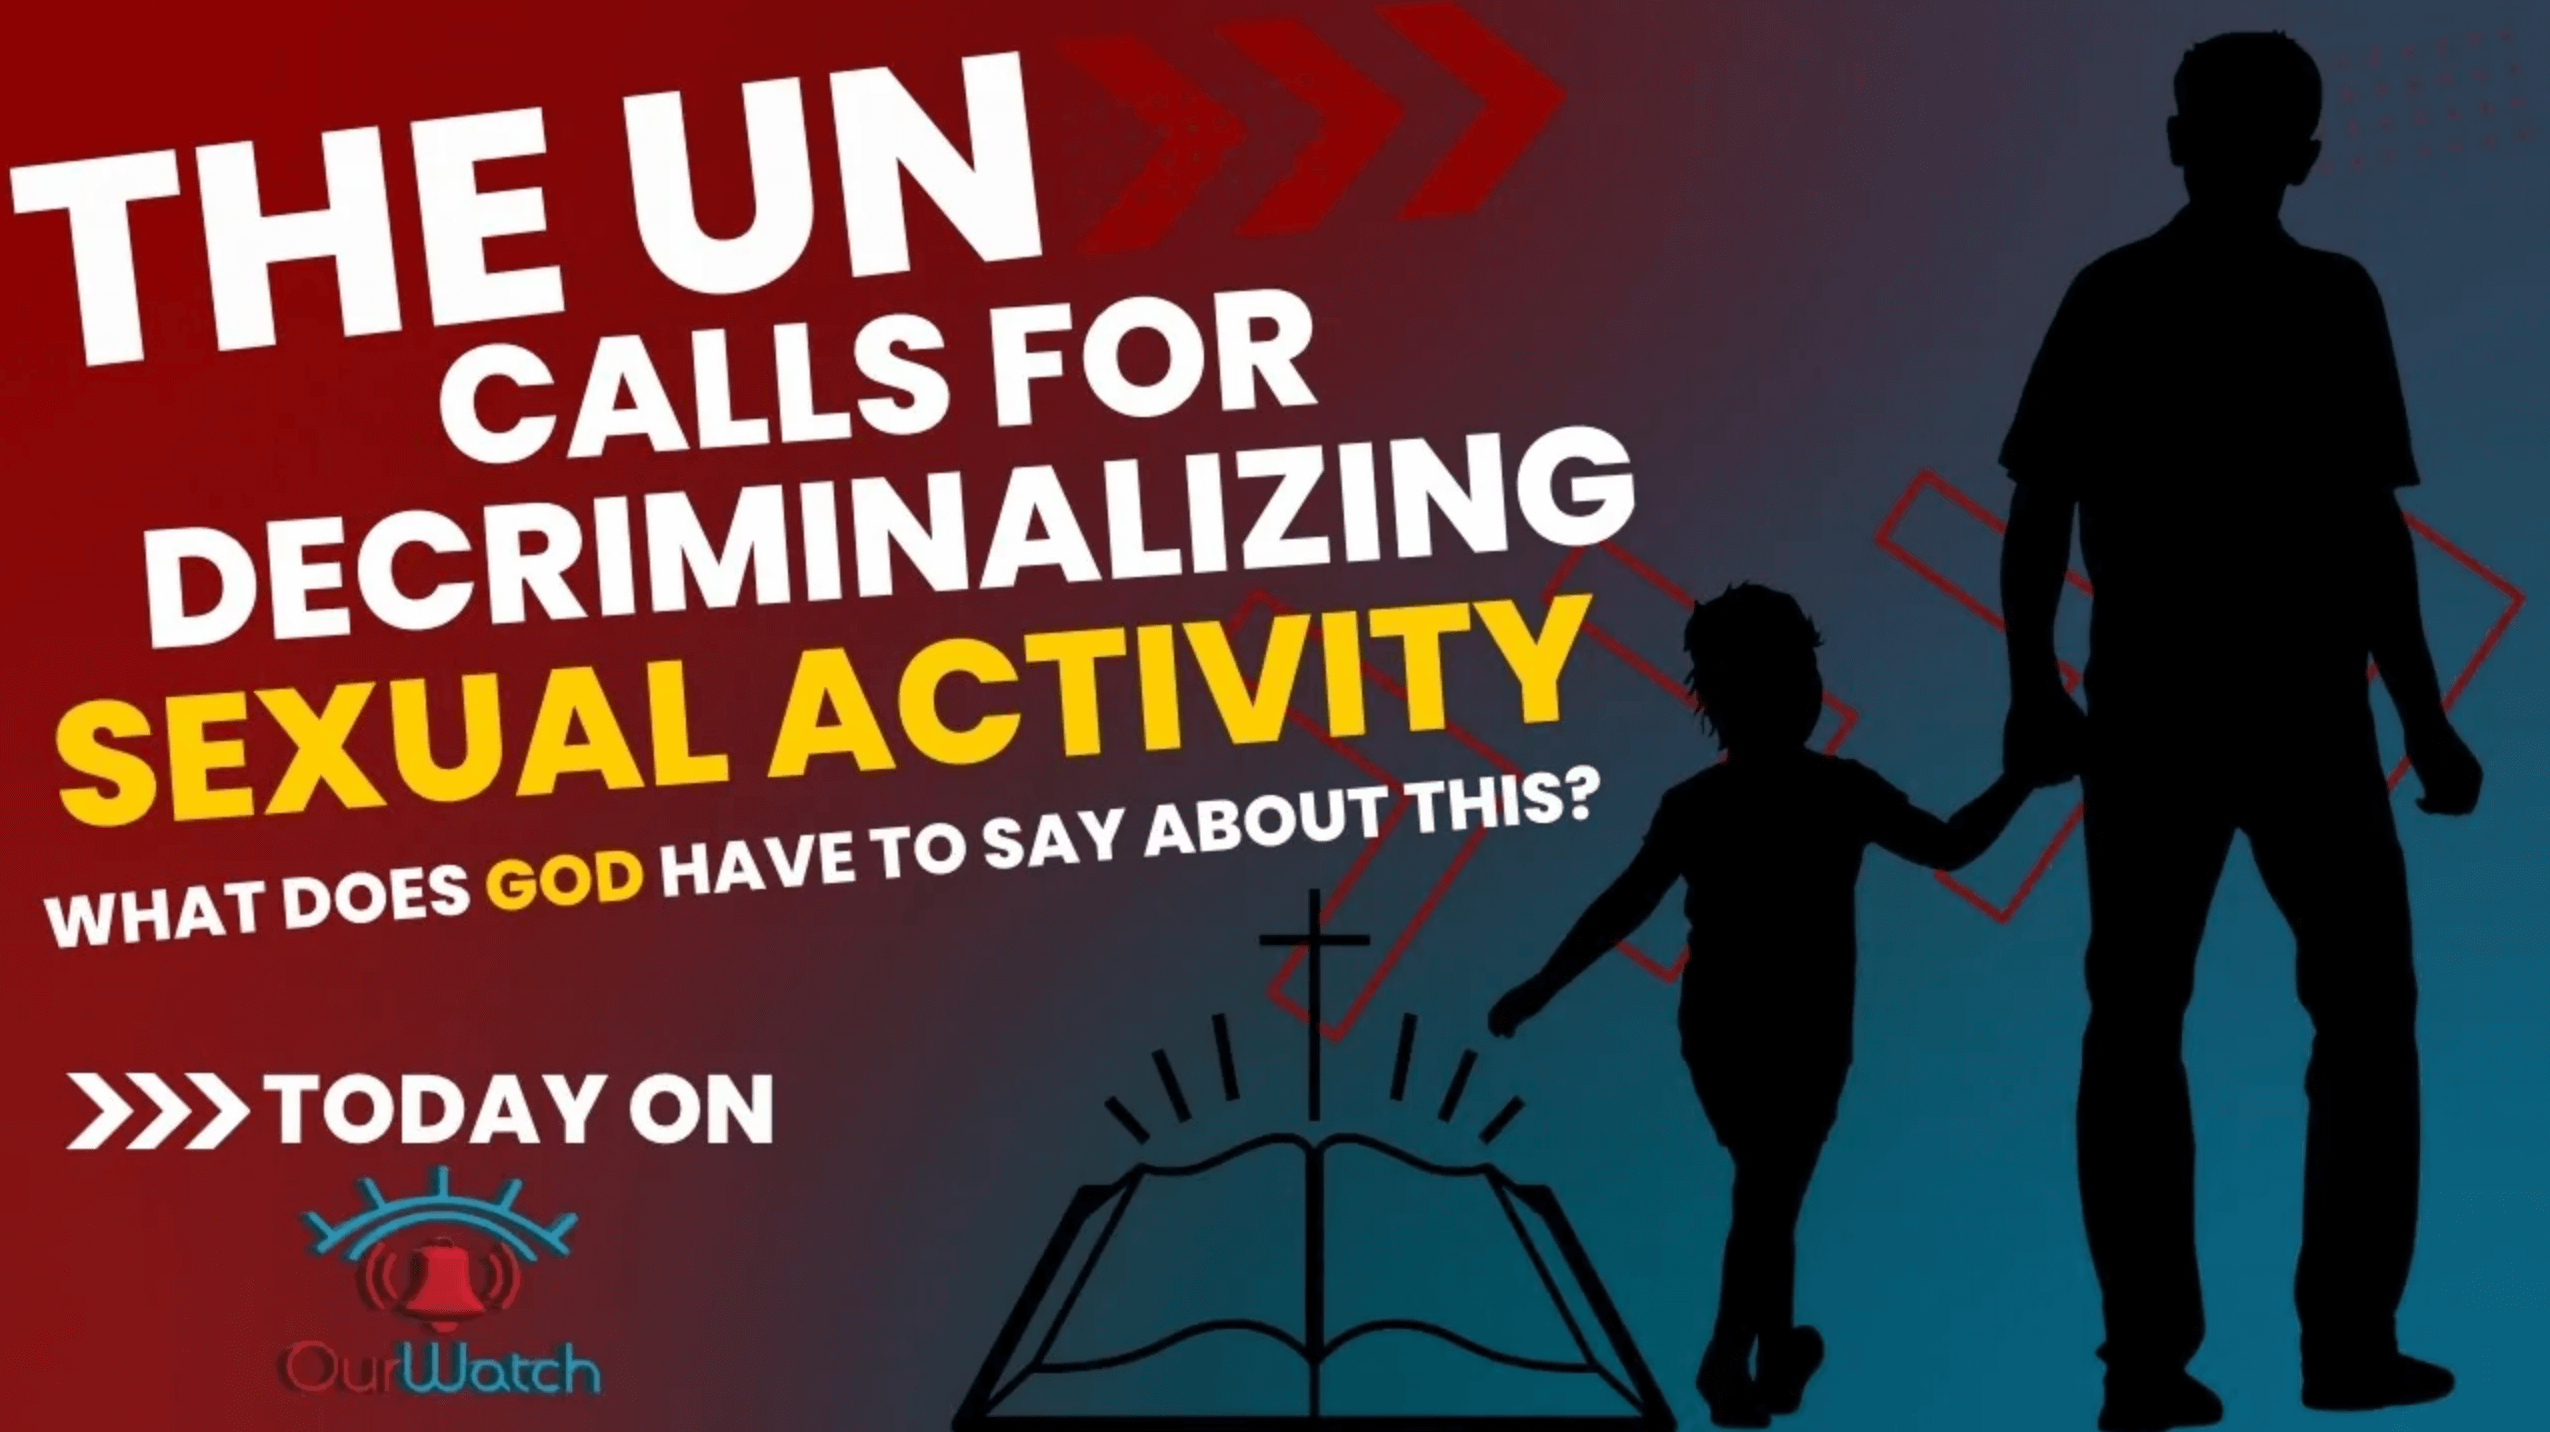 UN report calls for decriminalization of all sexual activity, including between adults and children